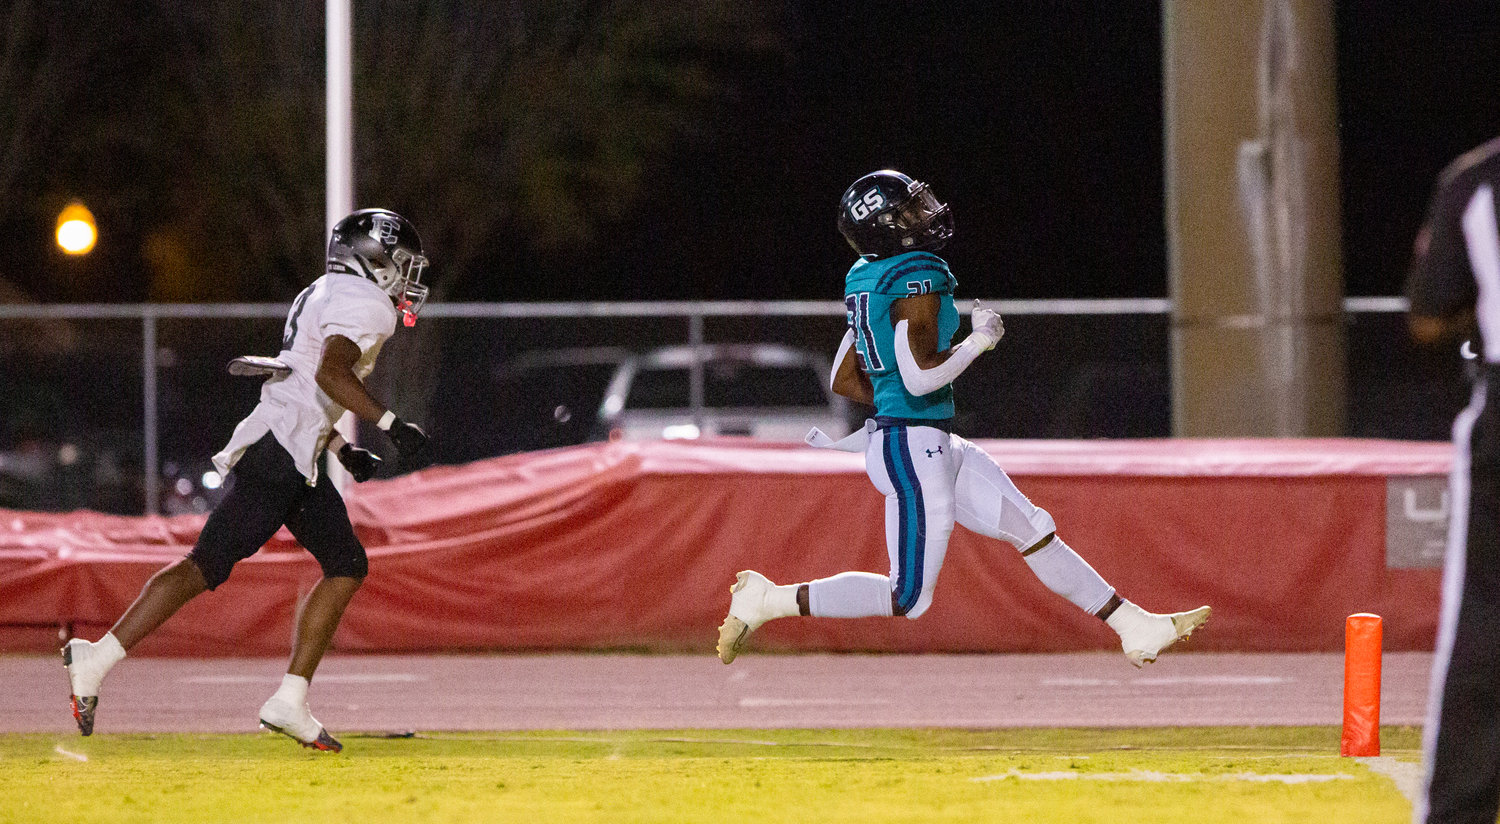 Gulf Shores senior running back JR Gardner skips into the end zone for the game-opening score against the Elberta Warriors in region action Thursday night at the Sportsplex. Gardner added another touchdown in the second quarter in the Dolphins’ 49-3 win.